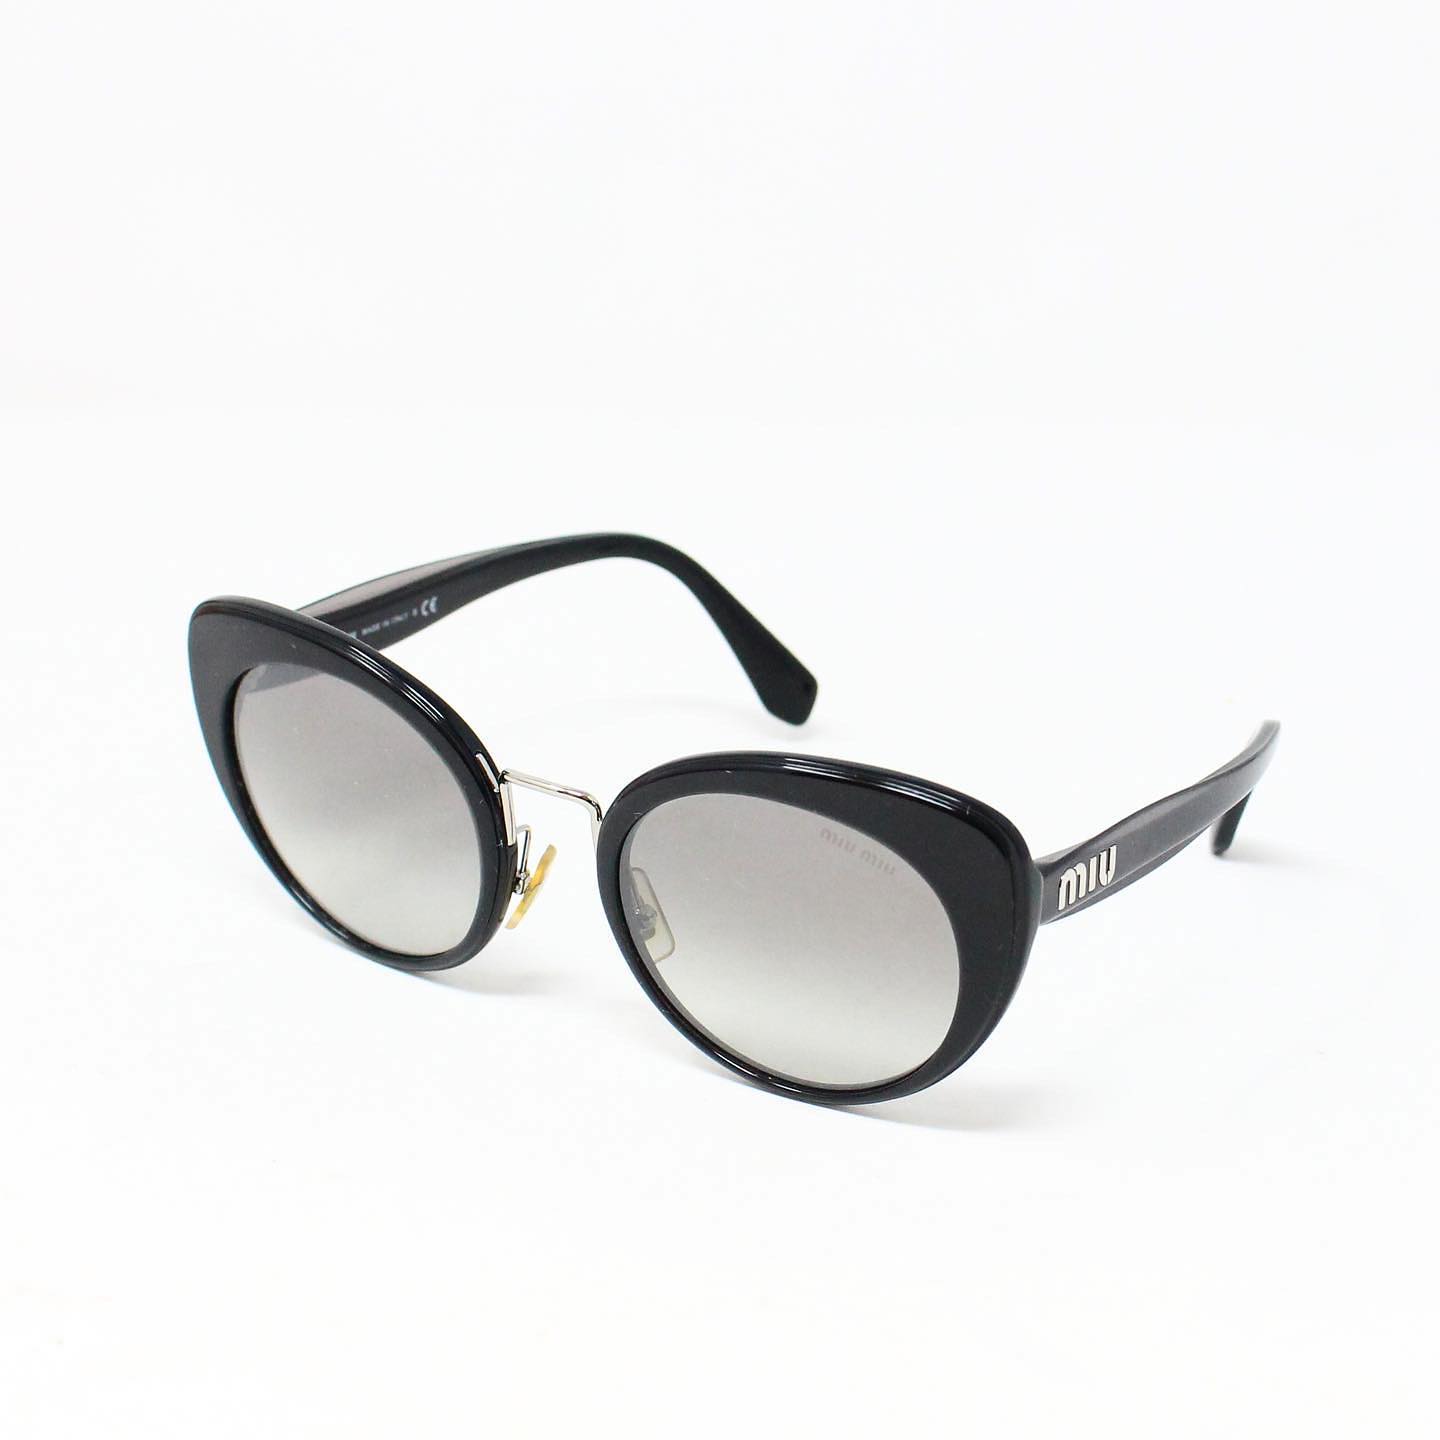 MIU Black Gold Nose Oval Eye Sunglasses – ALL YOUR BLISS